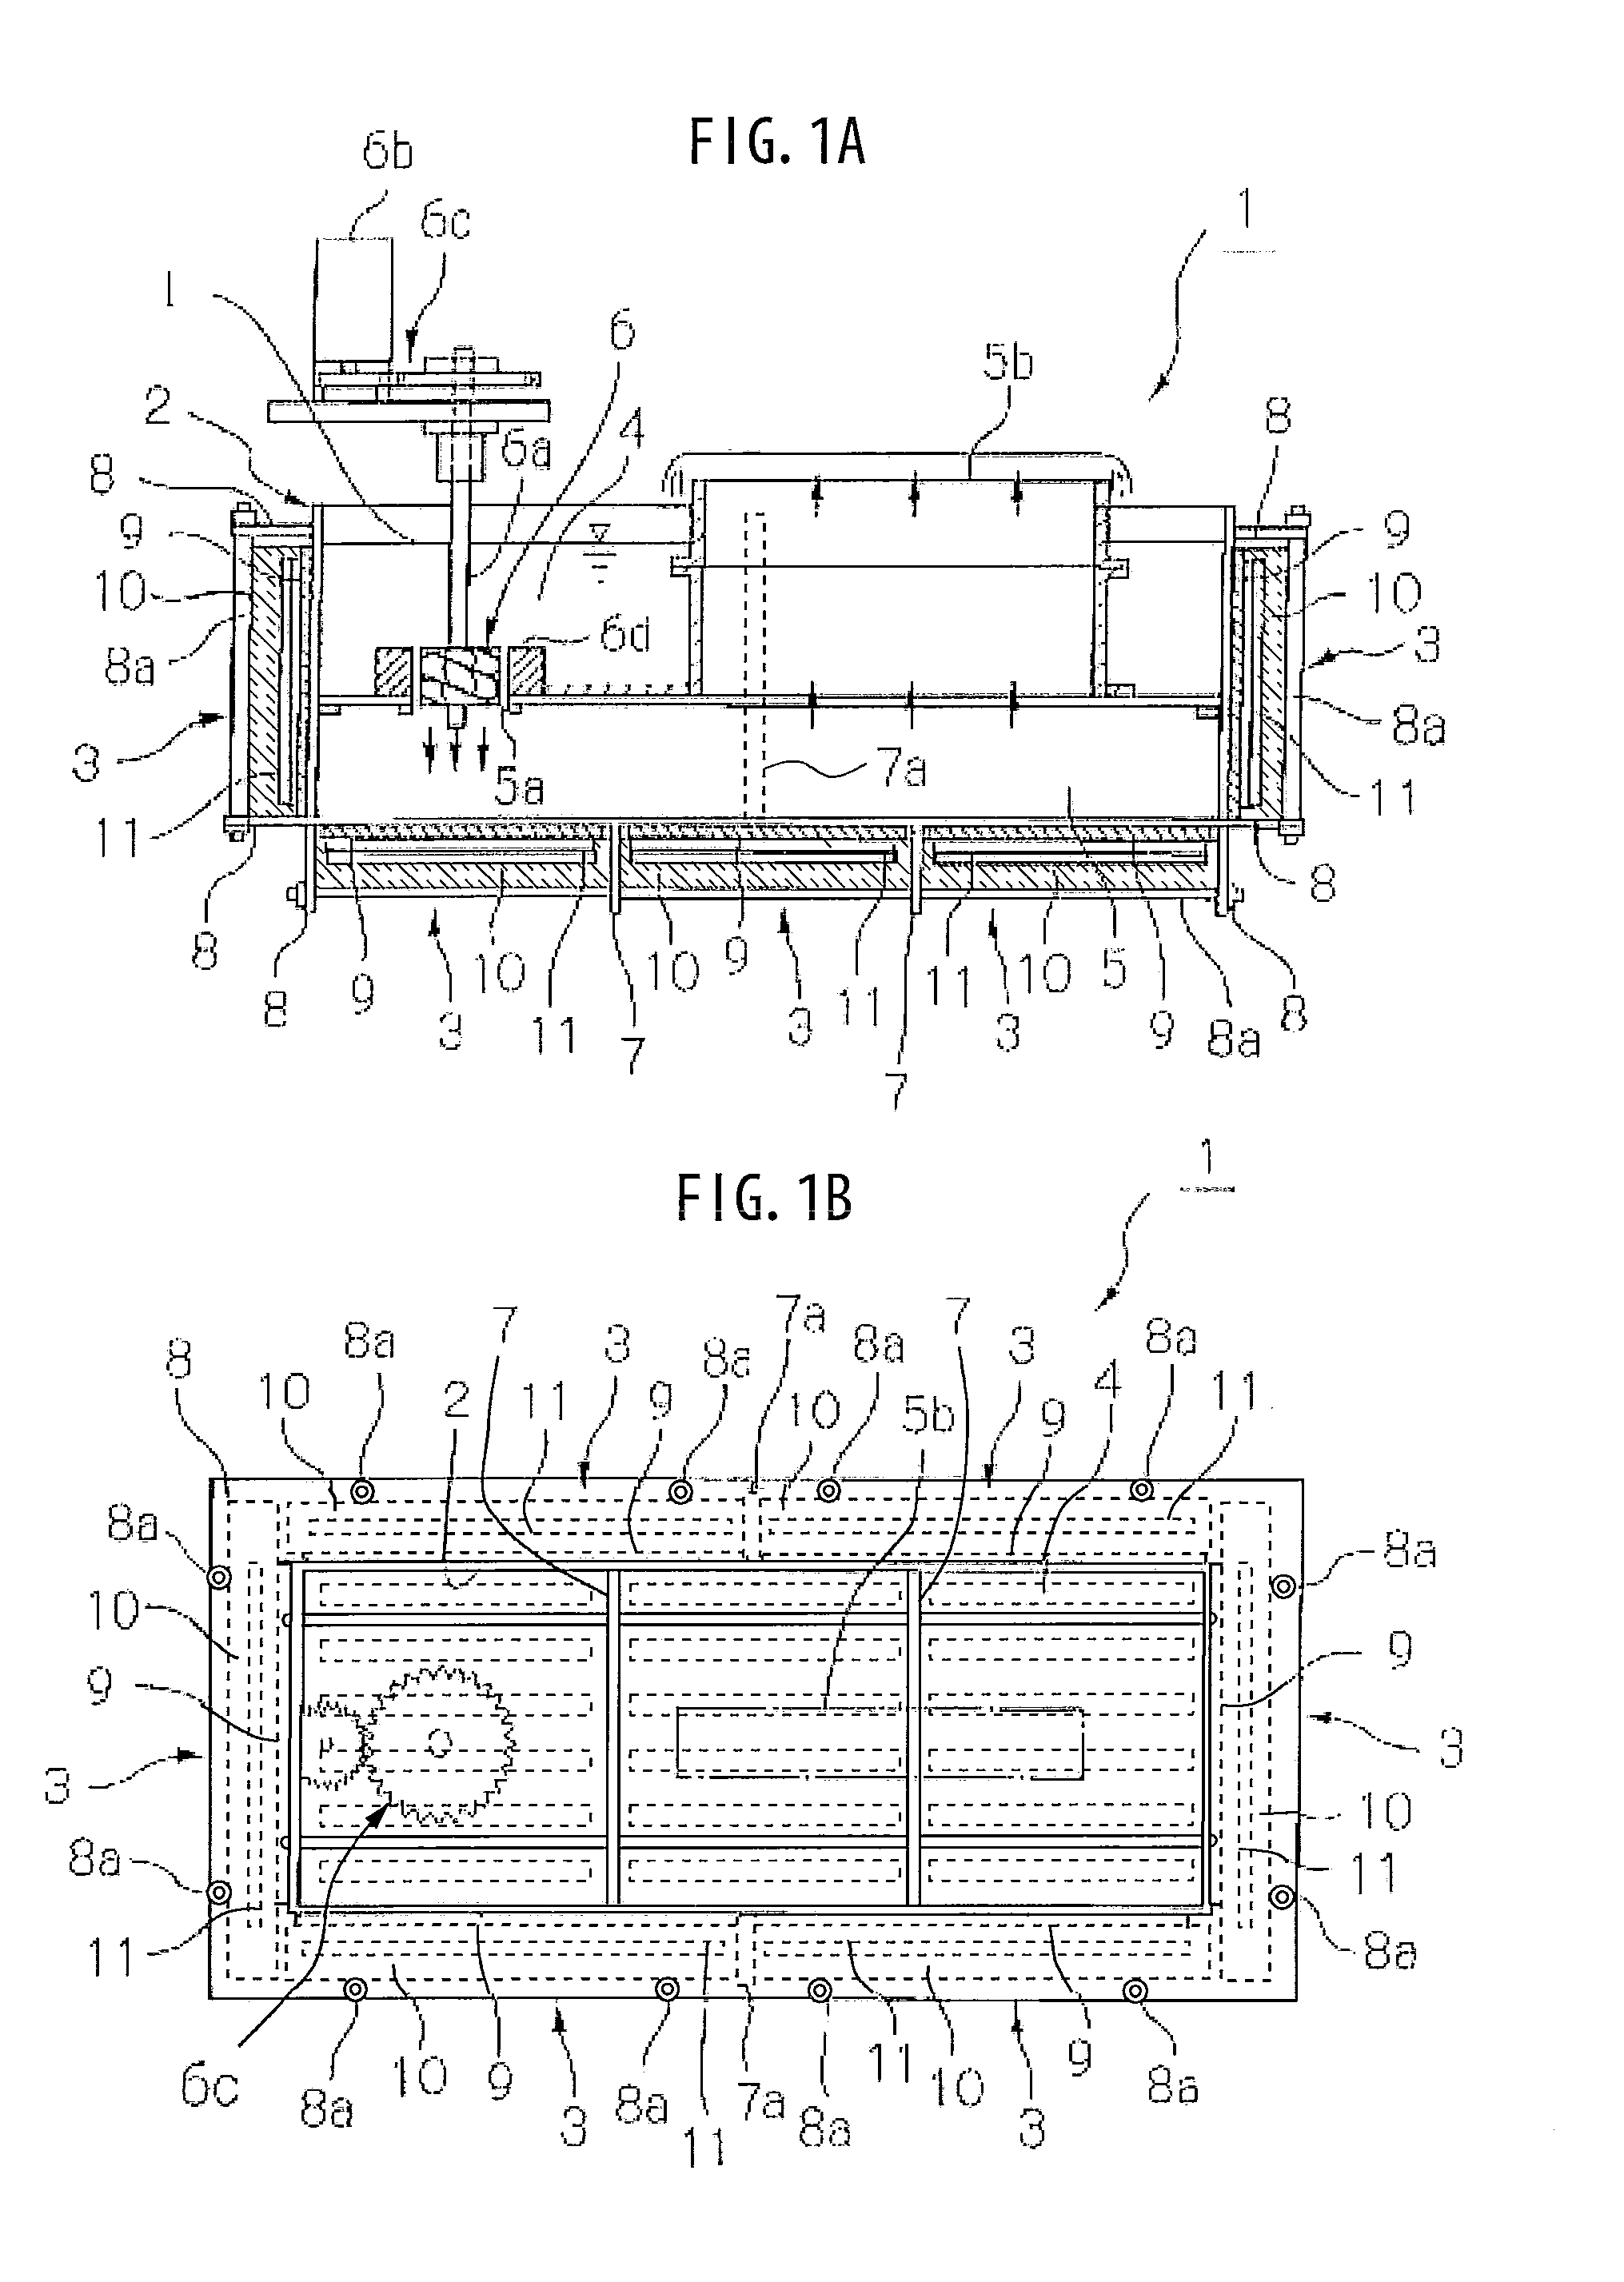 Solder bath and method of heating solder contained in the solder bath